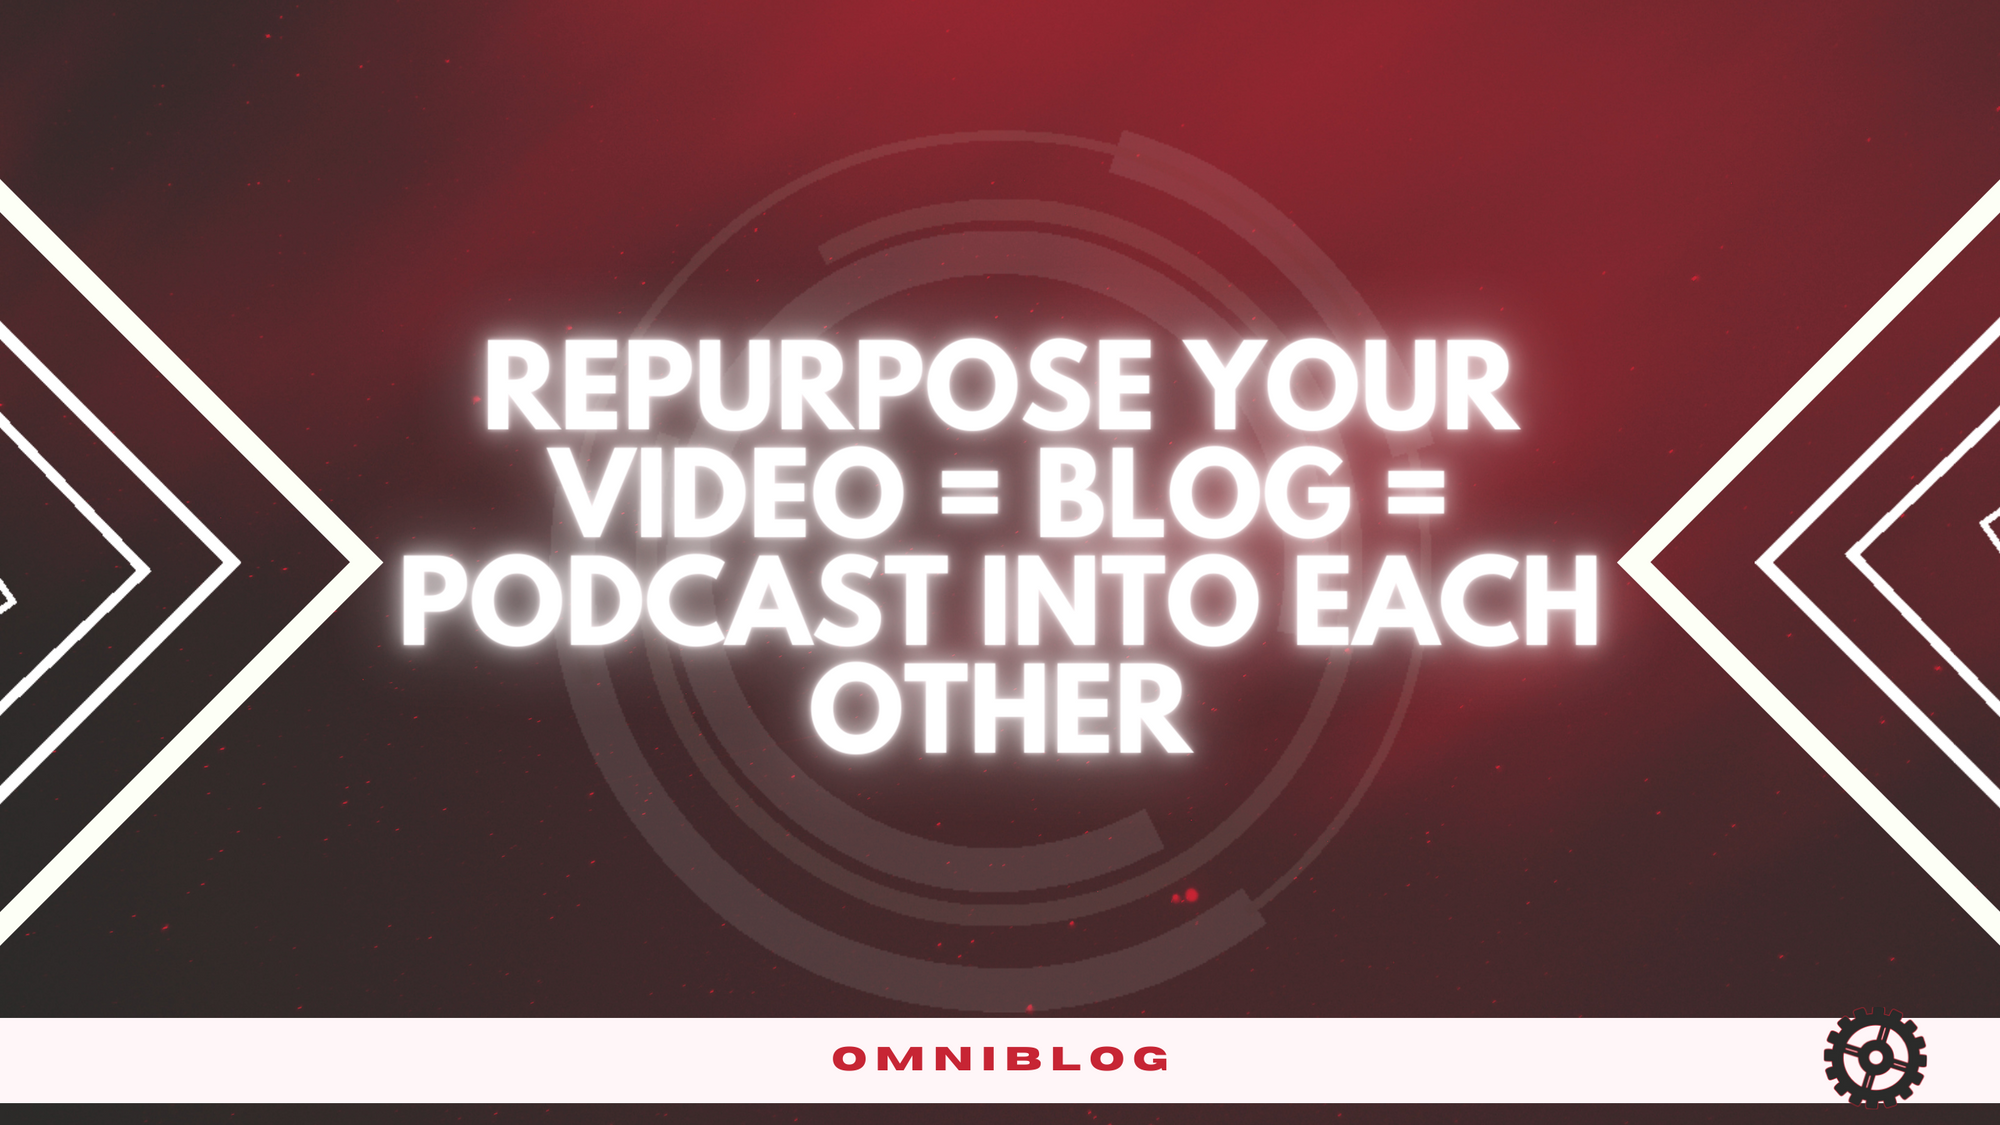 Repurpose Your Video = Blog = Podcast into Each Other